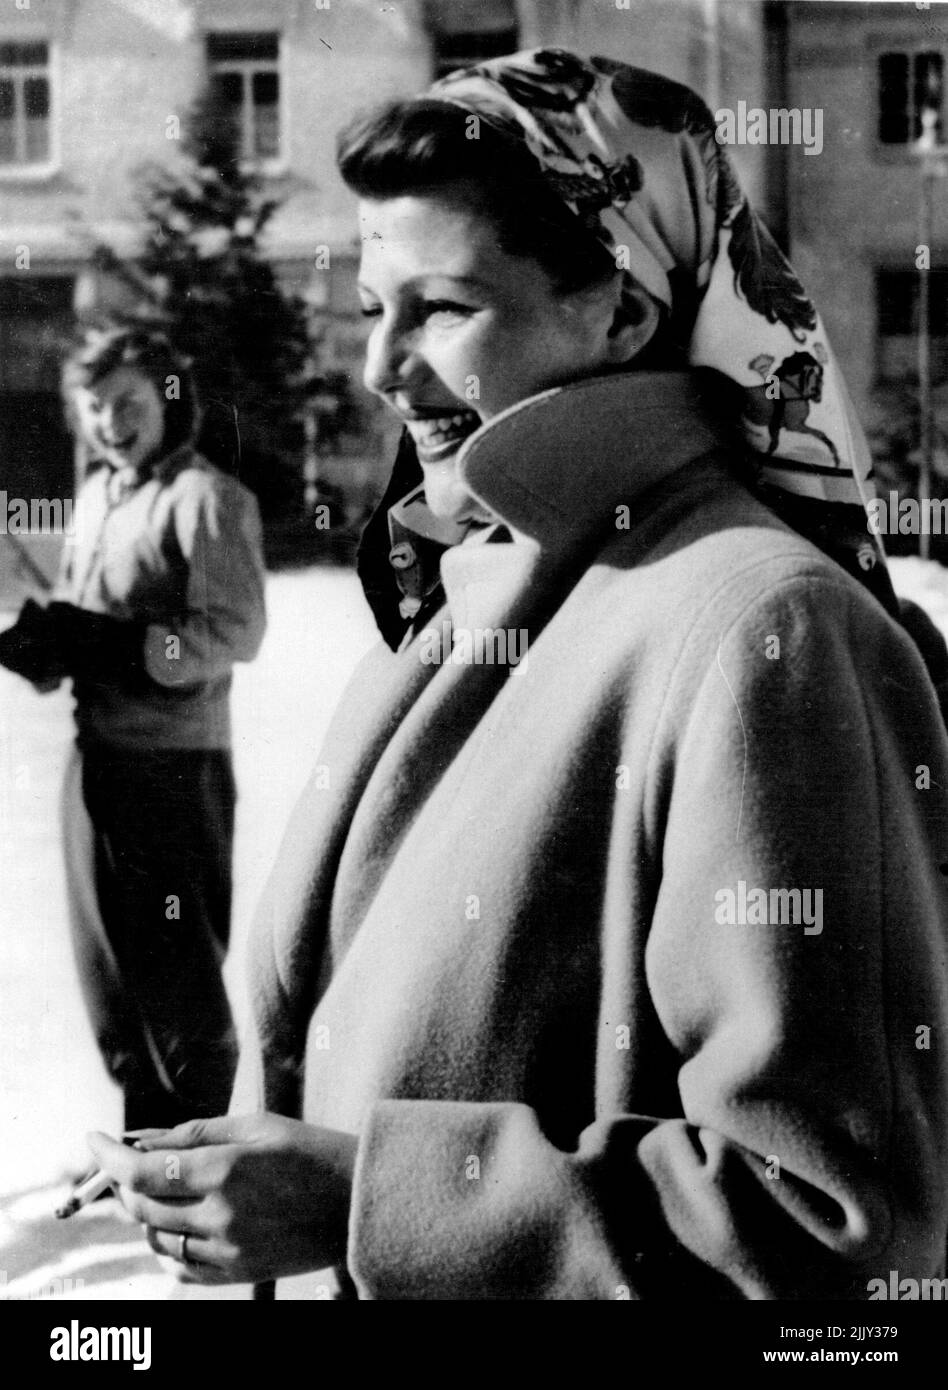 Rita Up And About Again - This exclusive picture, the first to be taken since she left the nursing home after the birth of her baby, Yasmin, shows Rita Hayworth, film actress wife of Prince Aly Khan, at the Palace Ice Rink here. Rita smoked a cigarette while she watched her other daughter, Rebecca, take her first steps on the ice. January 29, 1950. Stock Photo